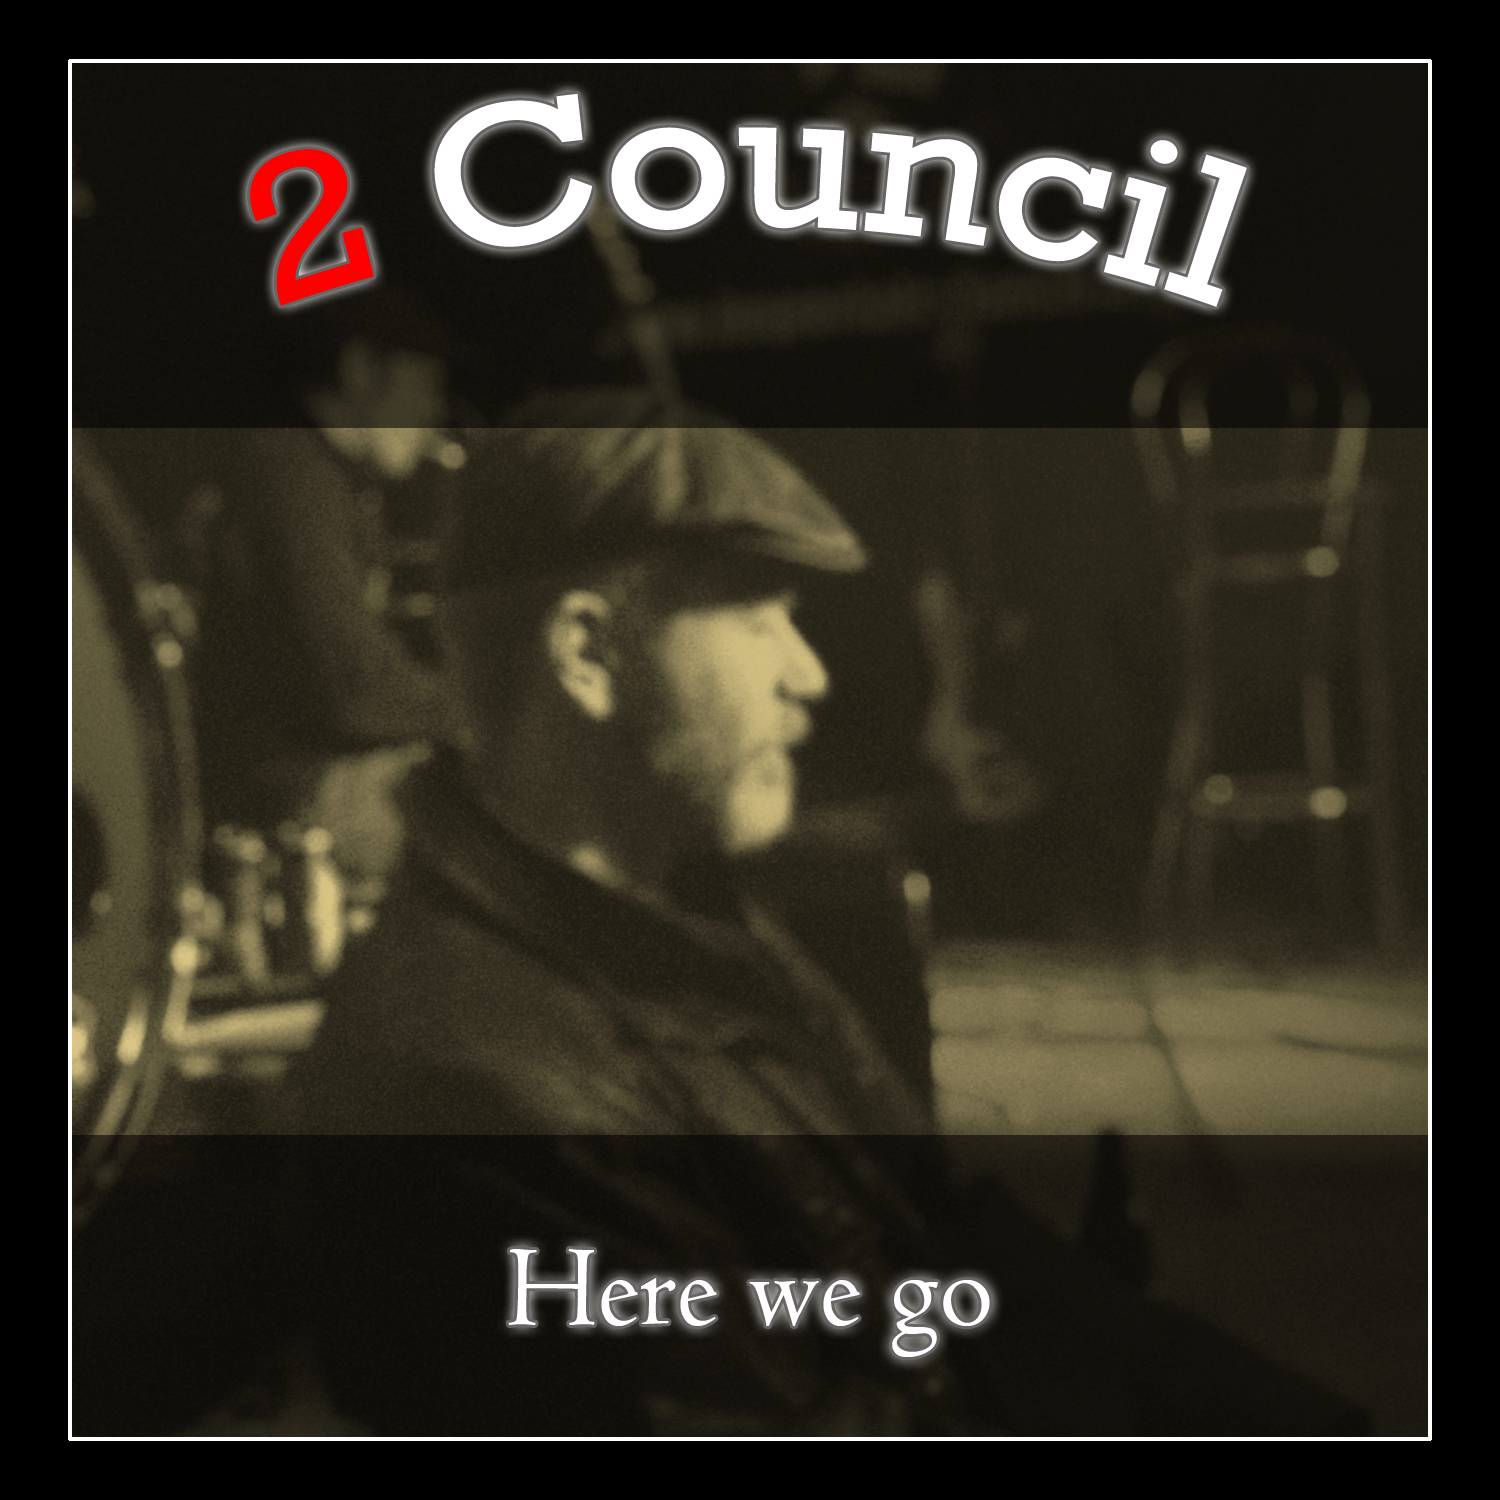 2 Council Here we go